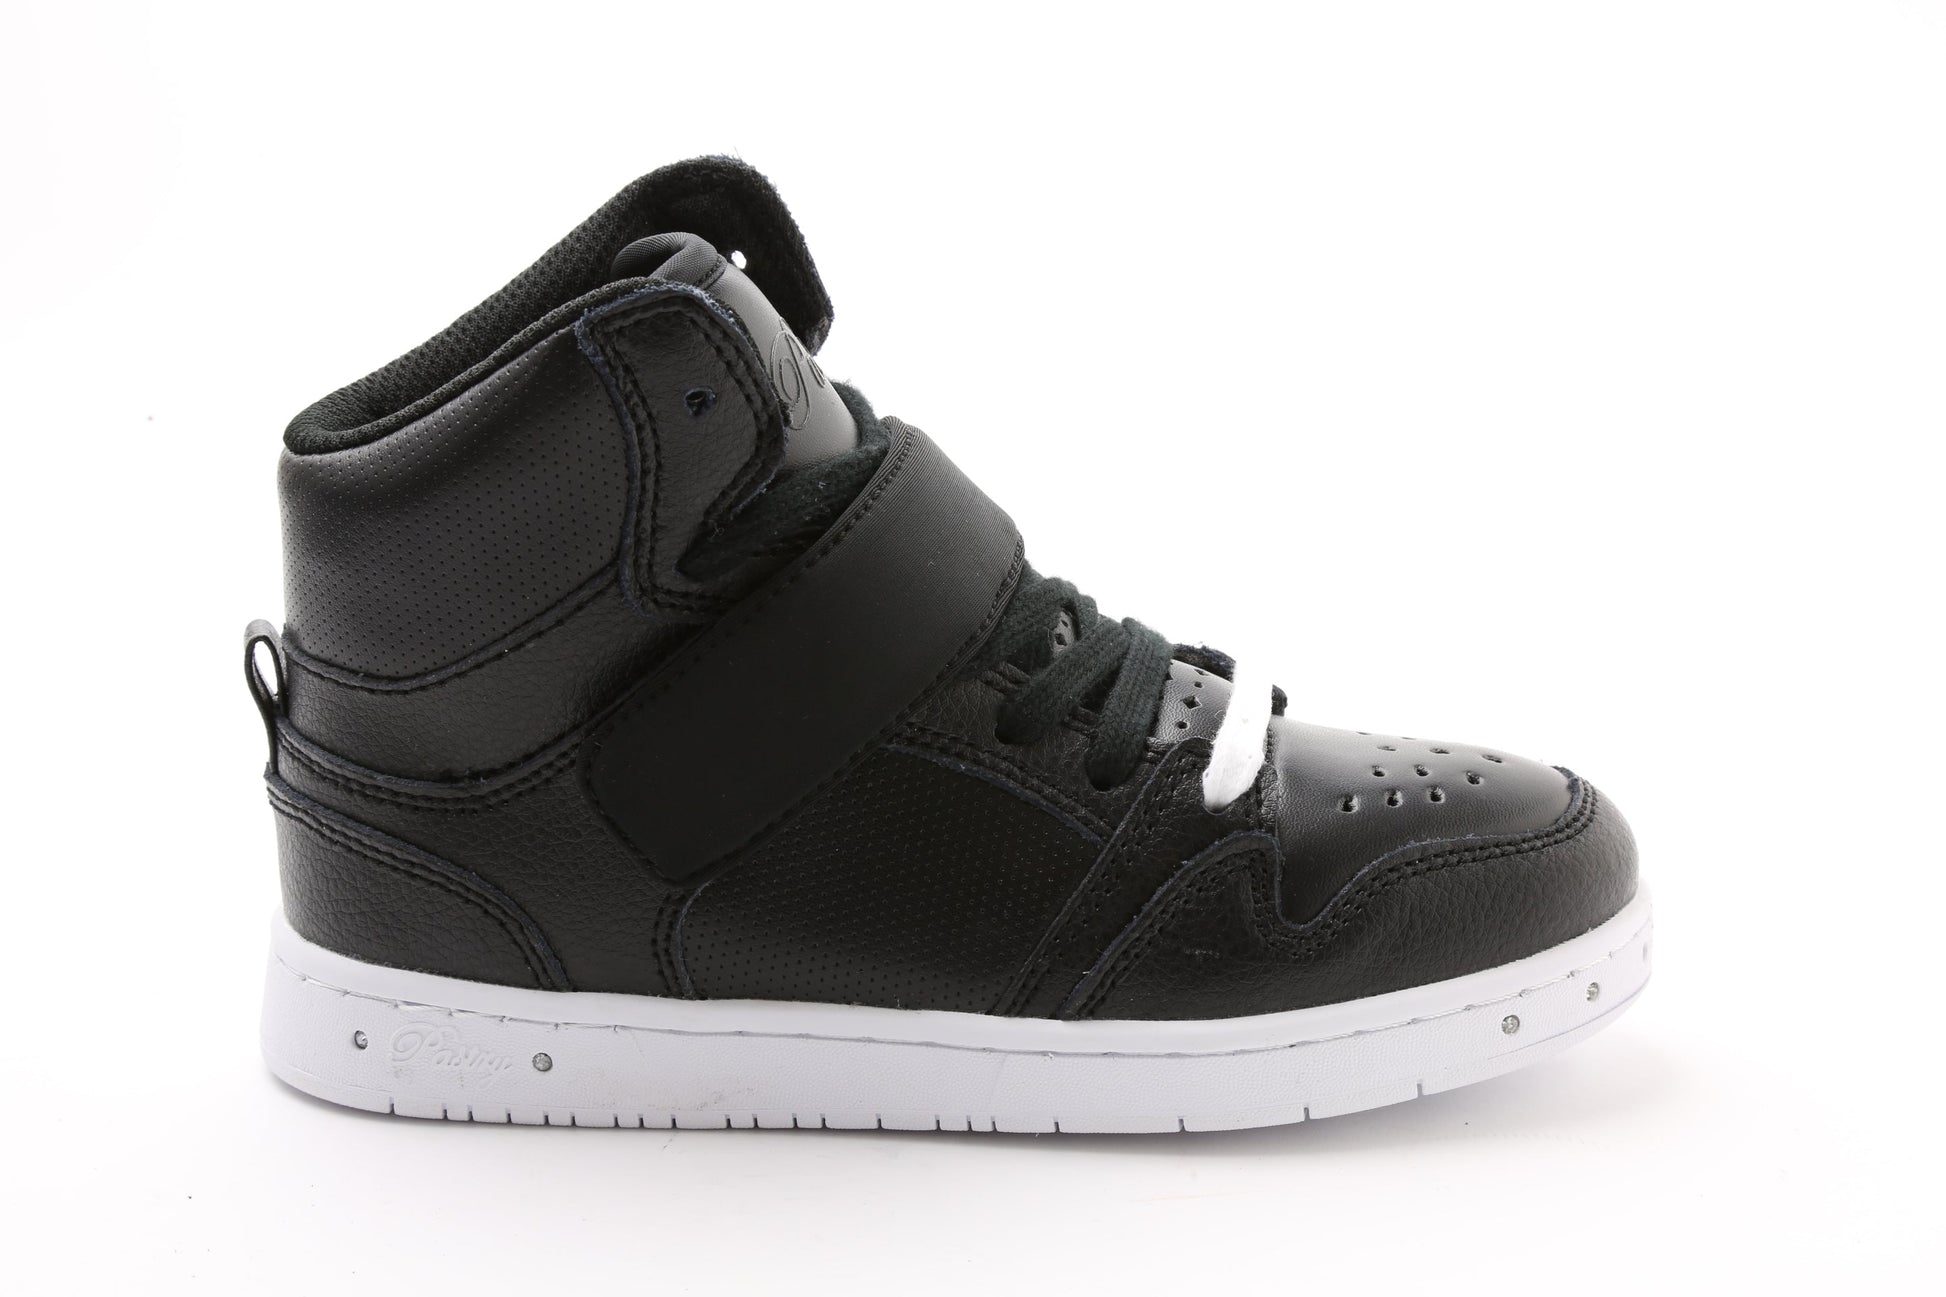 Pastry Glam Pie Custom Youth Sneaker in Black/White lateral view